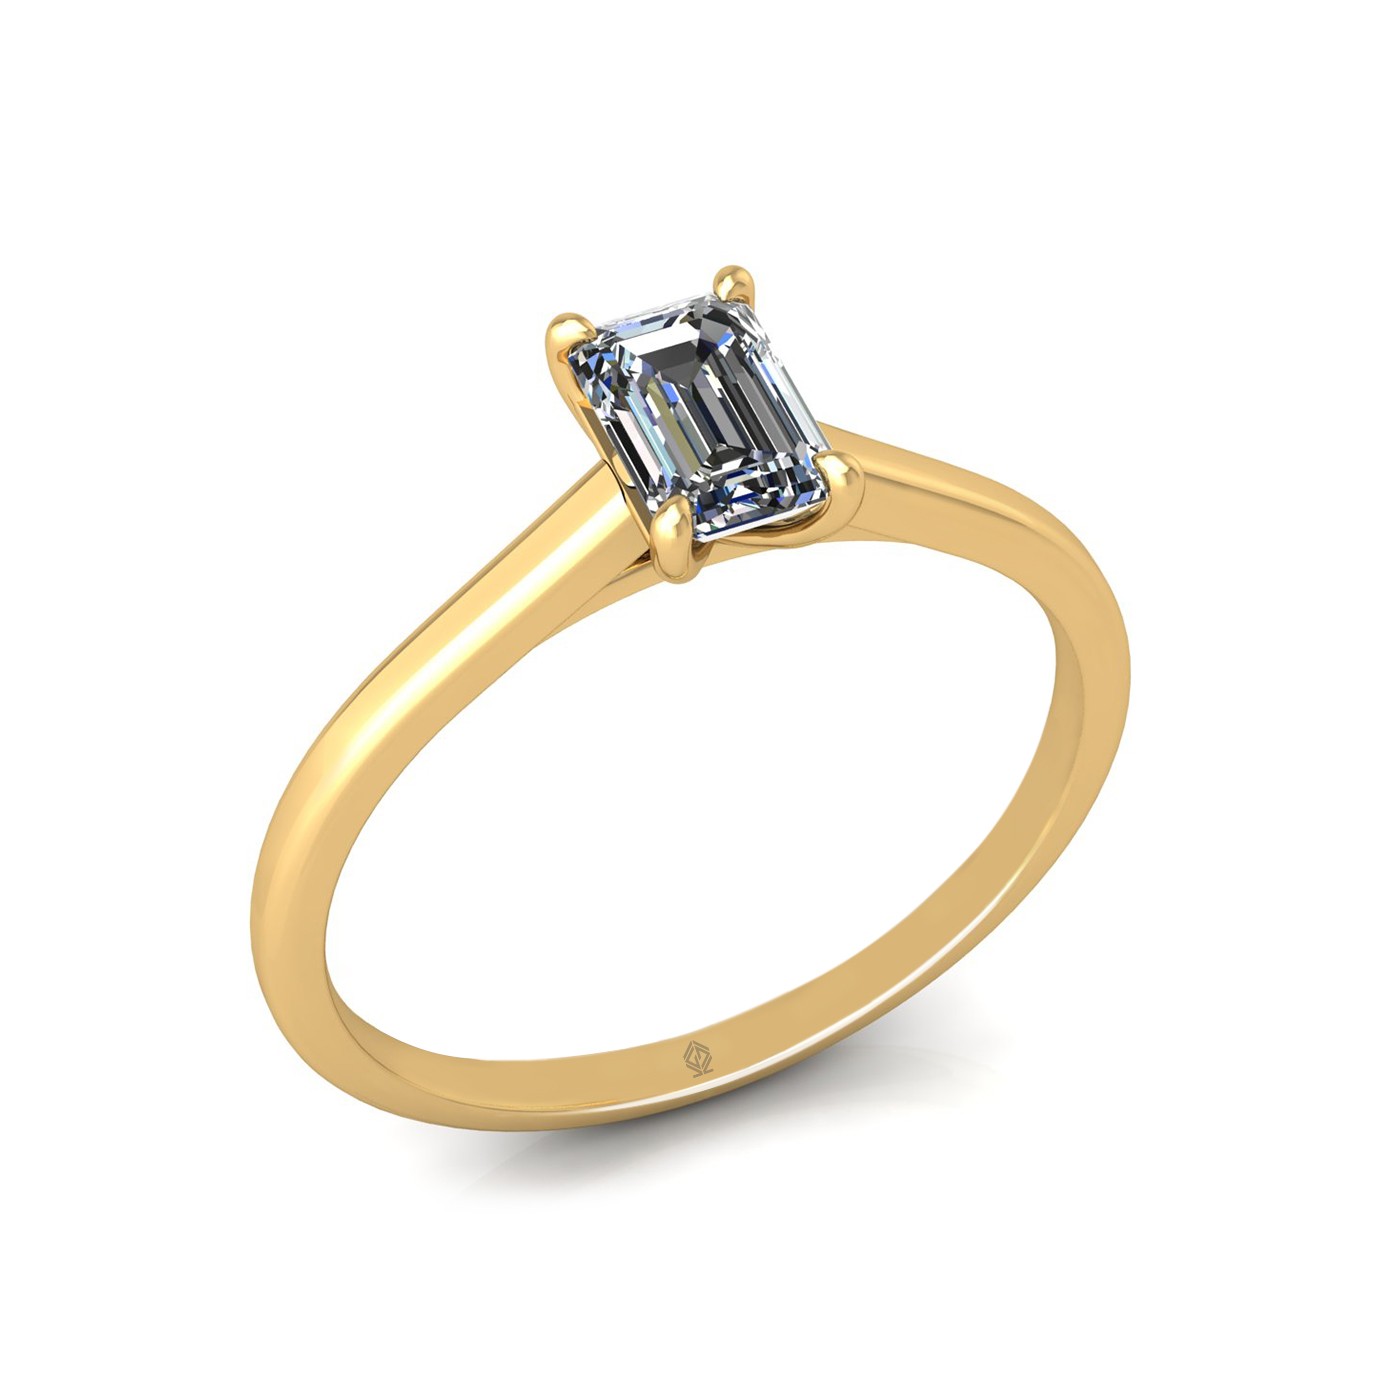 18k yellow gold  0,50 ct 4 prongs solitaire emerald cut diamond engagement ring with whisper thin band